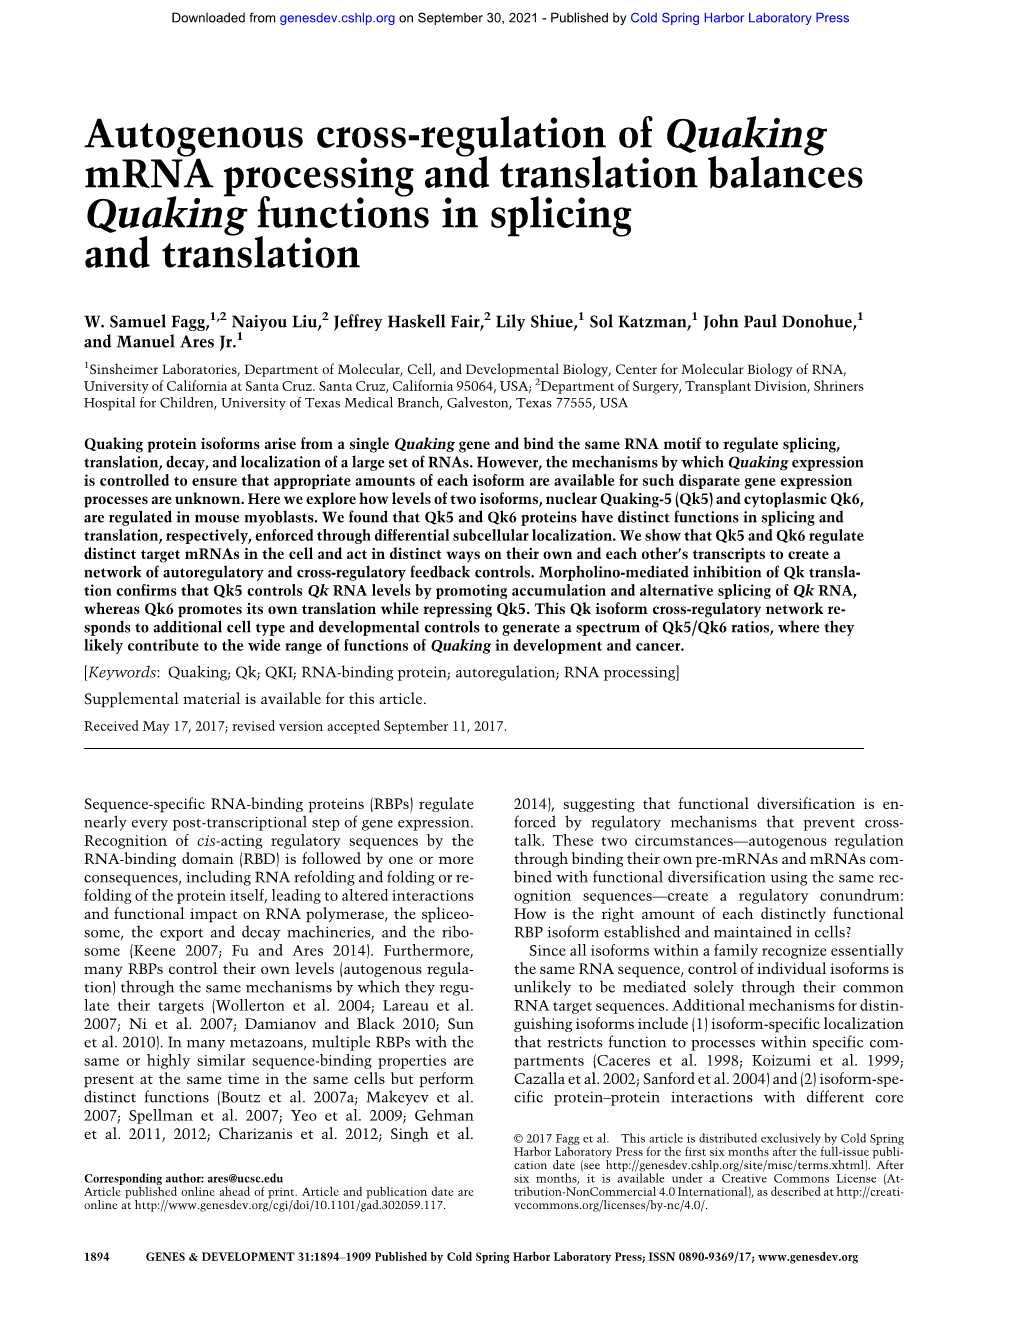 Mrna Processing and Translation Balances Quaking Functions in Splicing and Translation